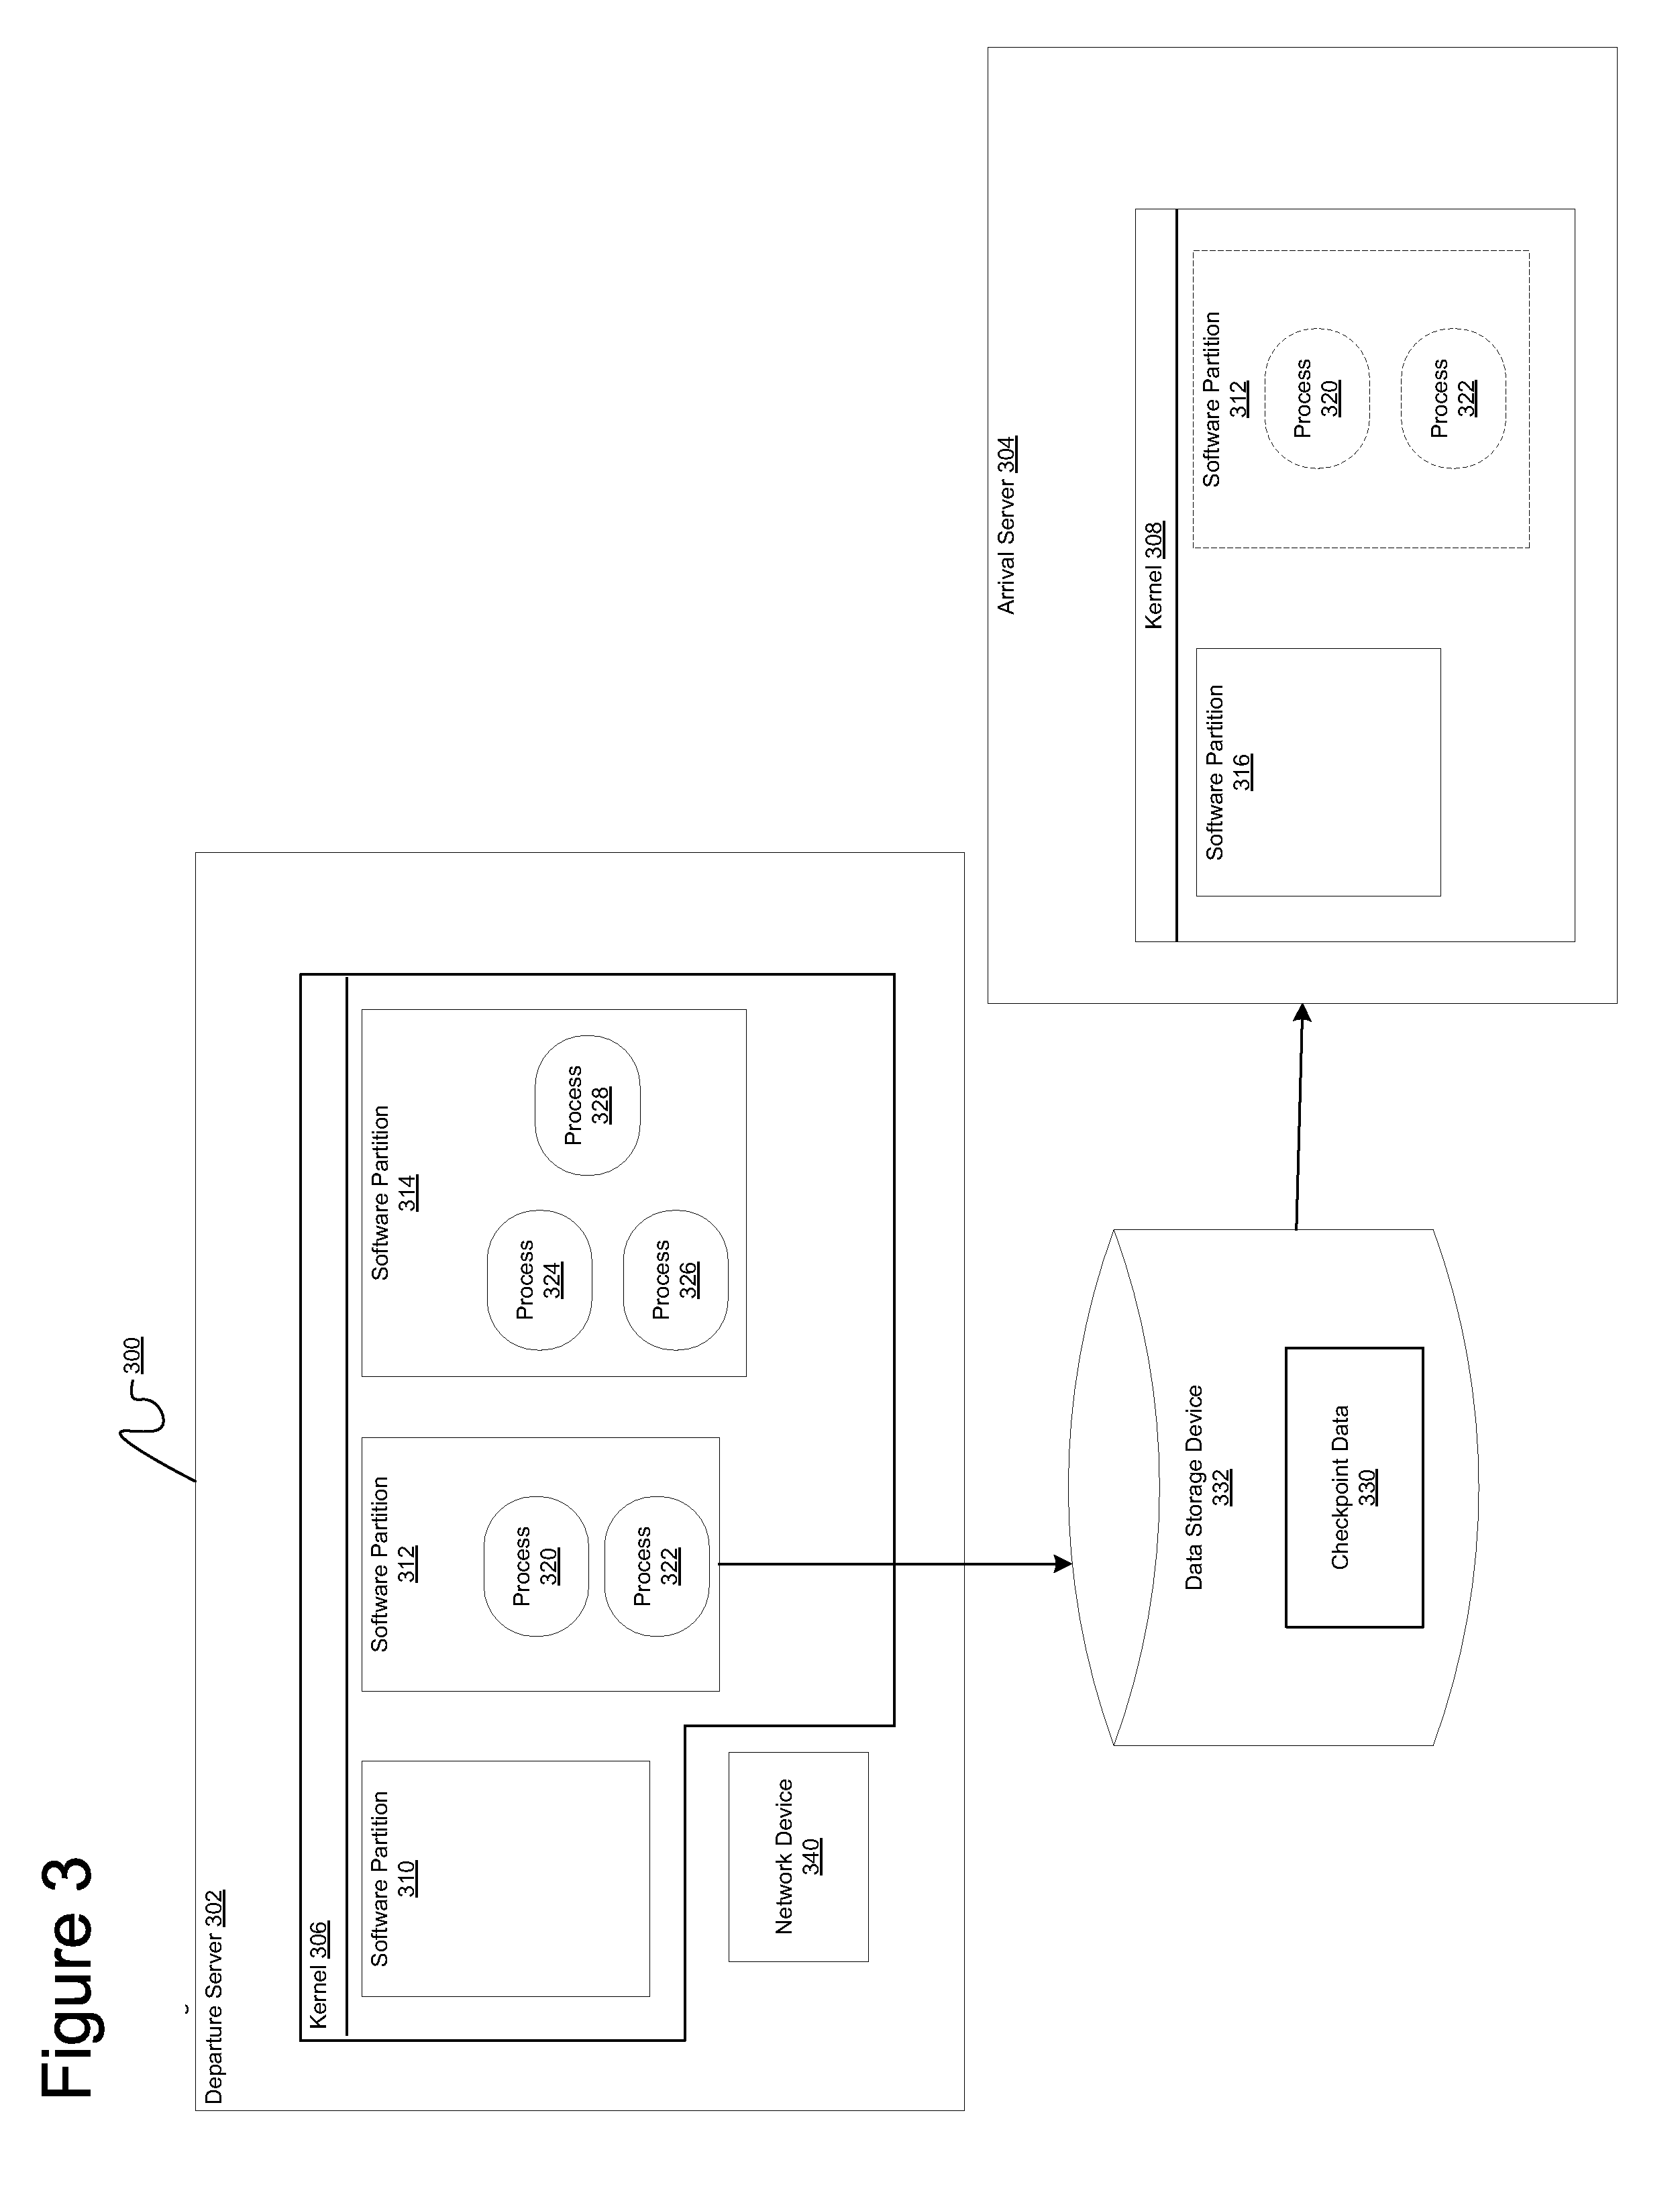 Method and apparatus for obtaining the absolute path name of an open file system object from its file descriptor